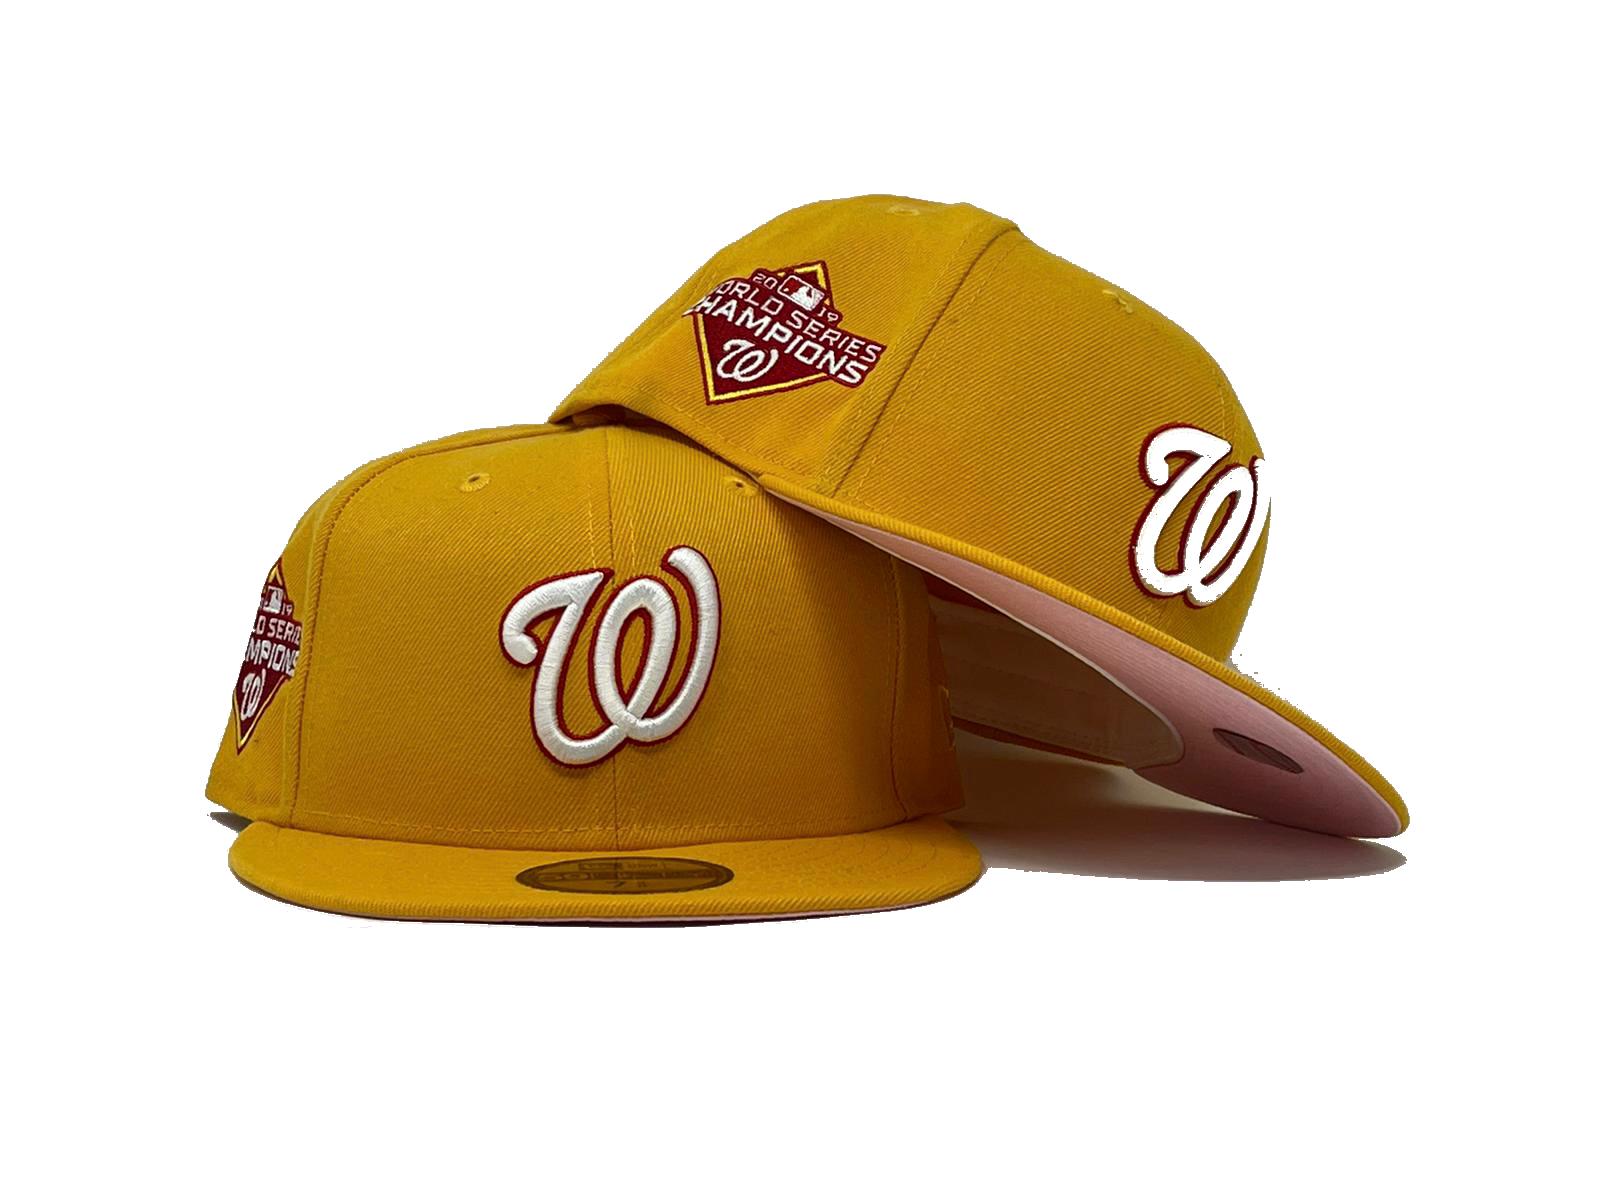 Washington Nationals gold championship jerseys and hats are now available  online